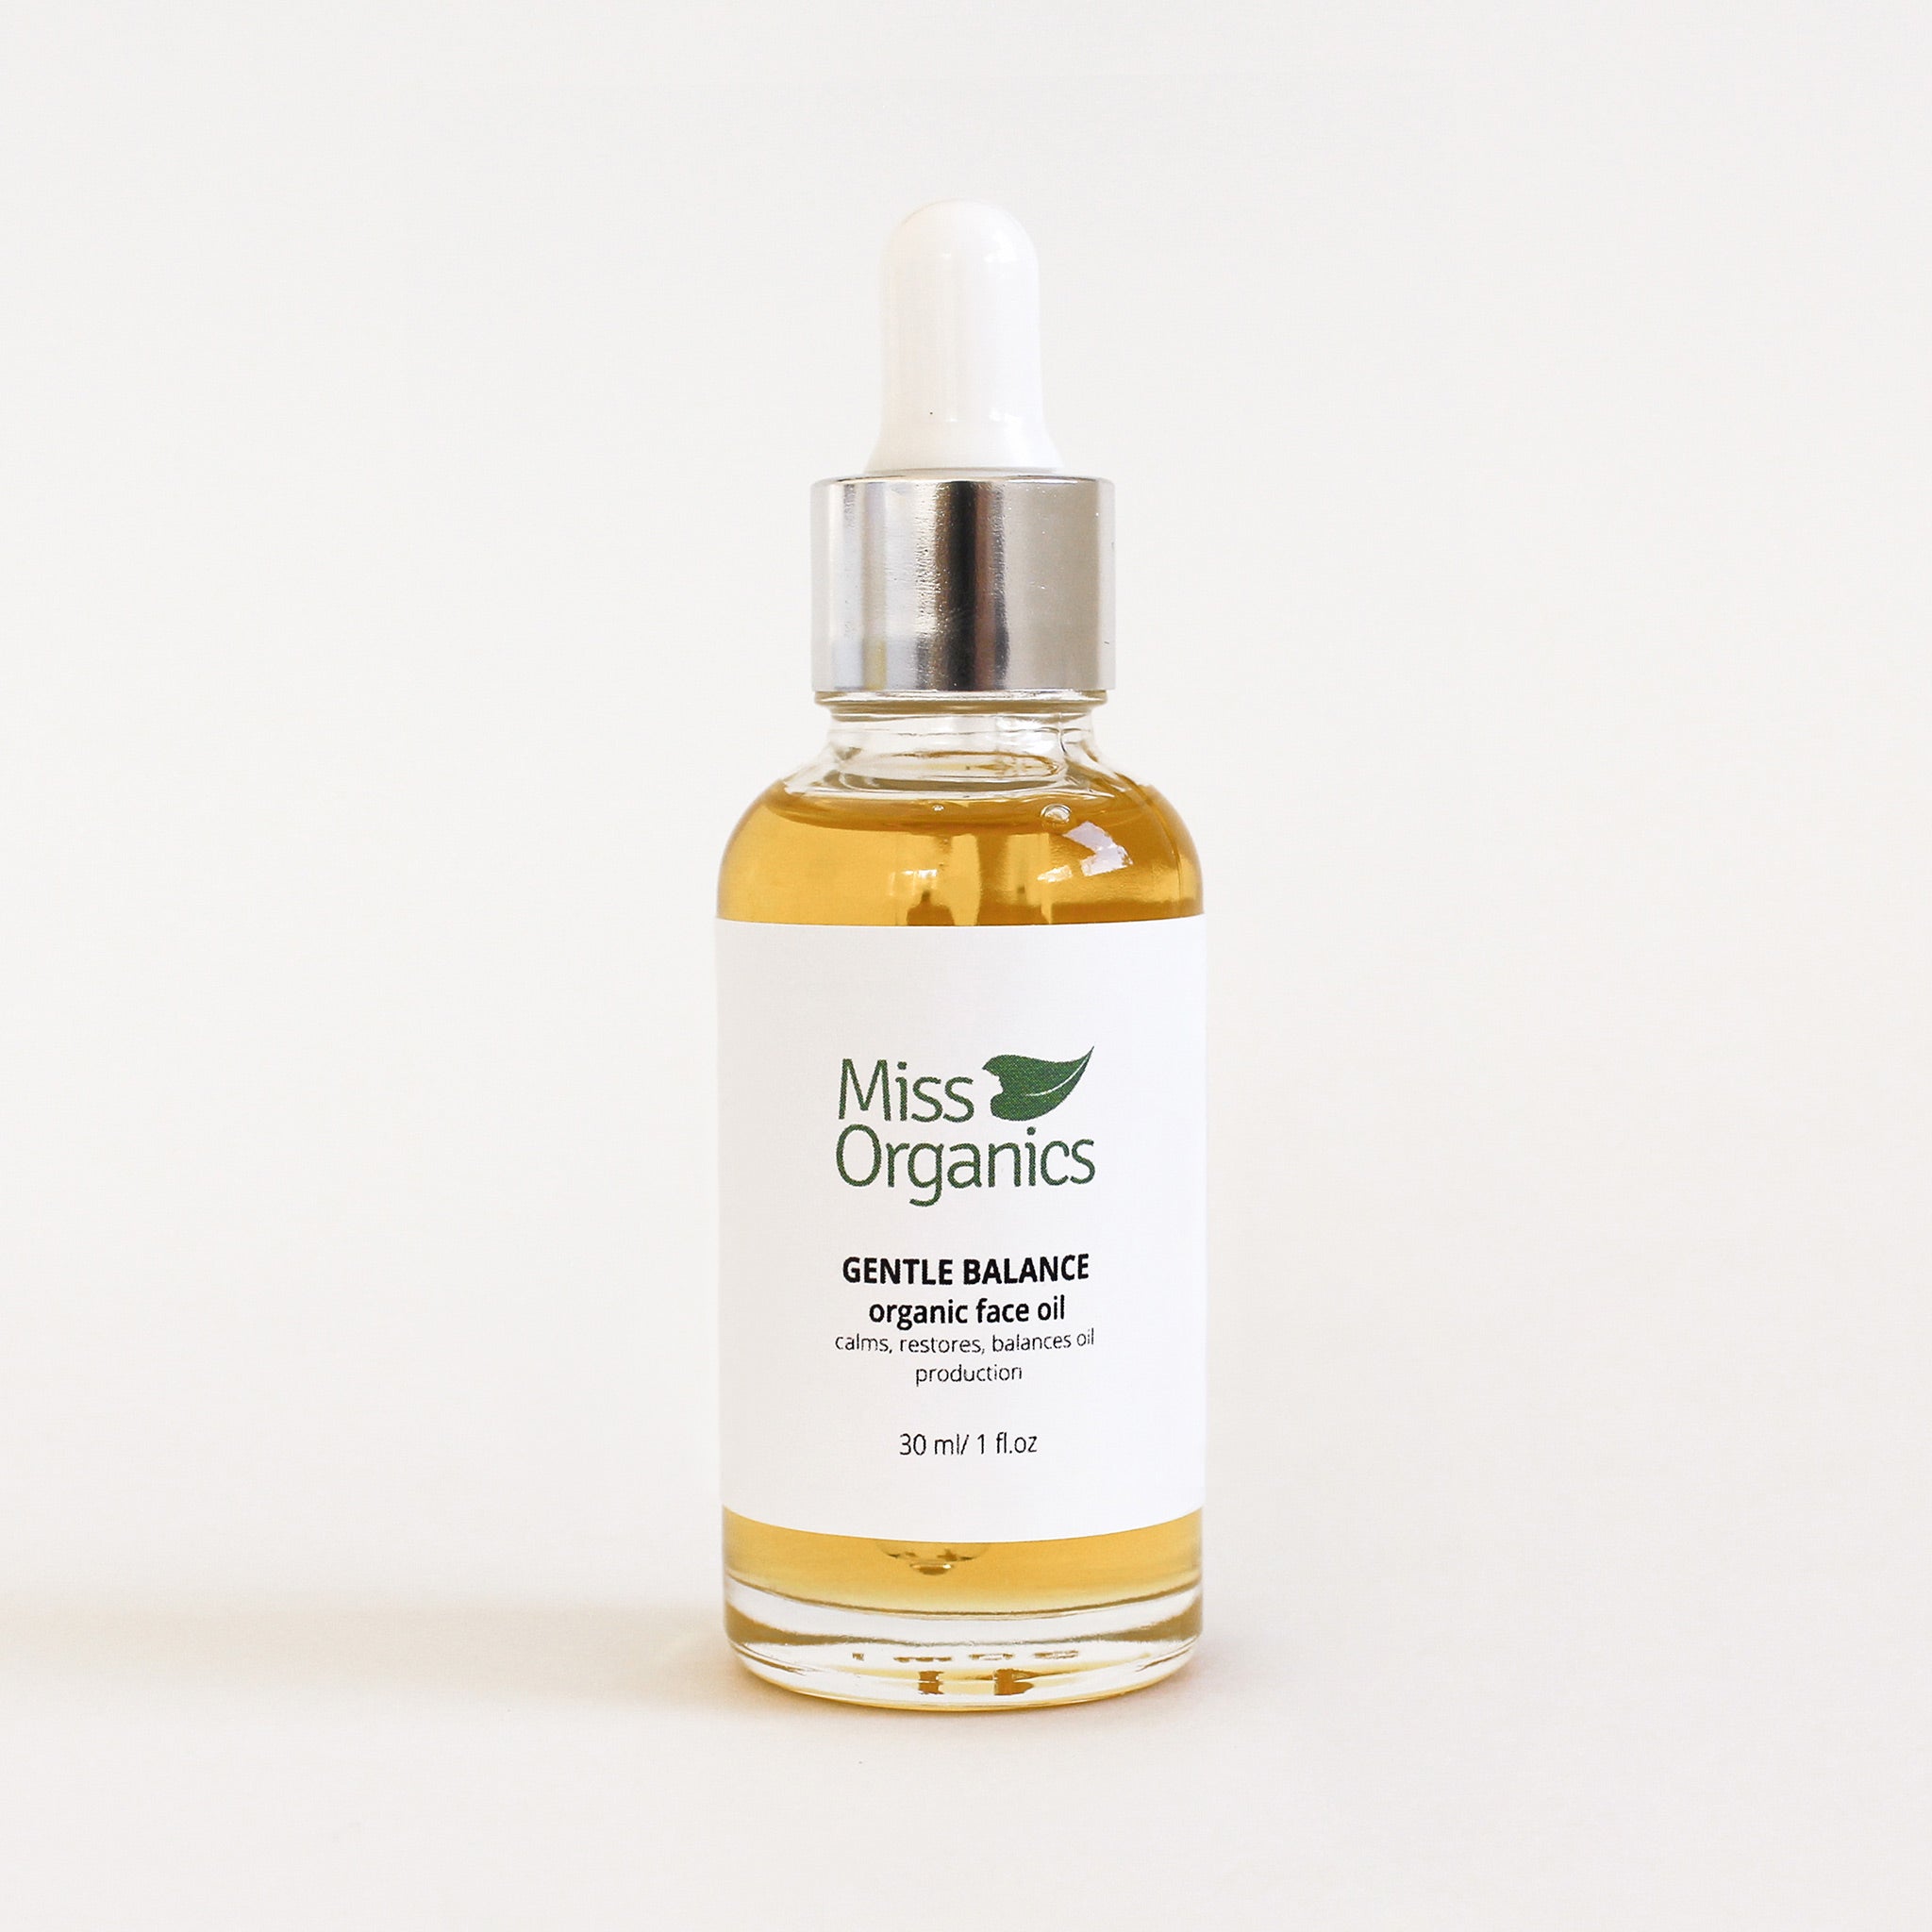 Gentle Balance Organic Face Oil in glass bottle on cream background